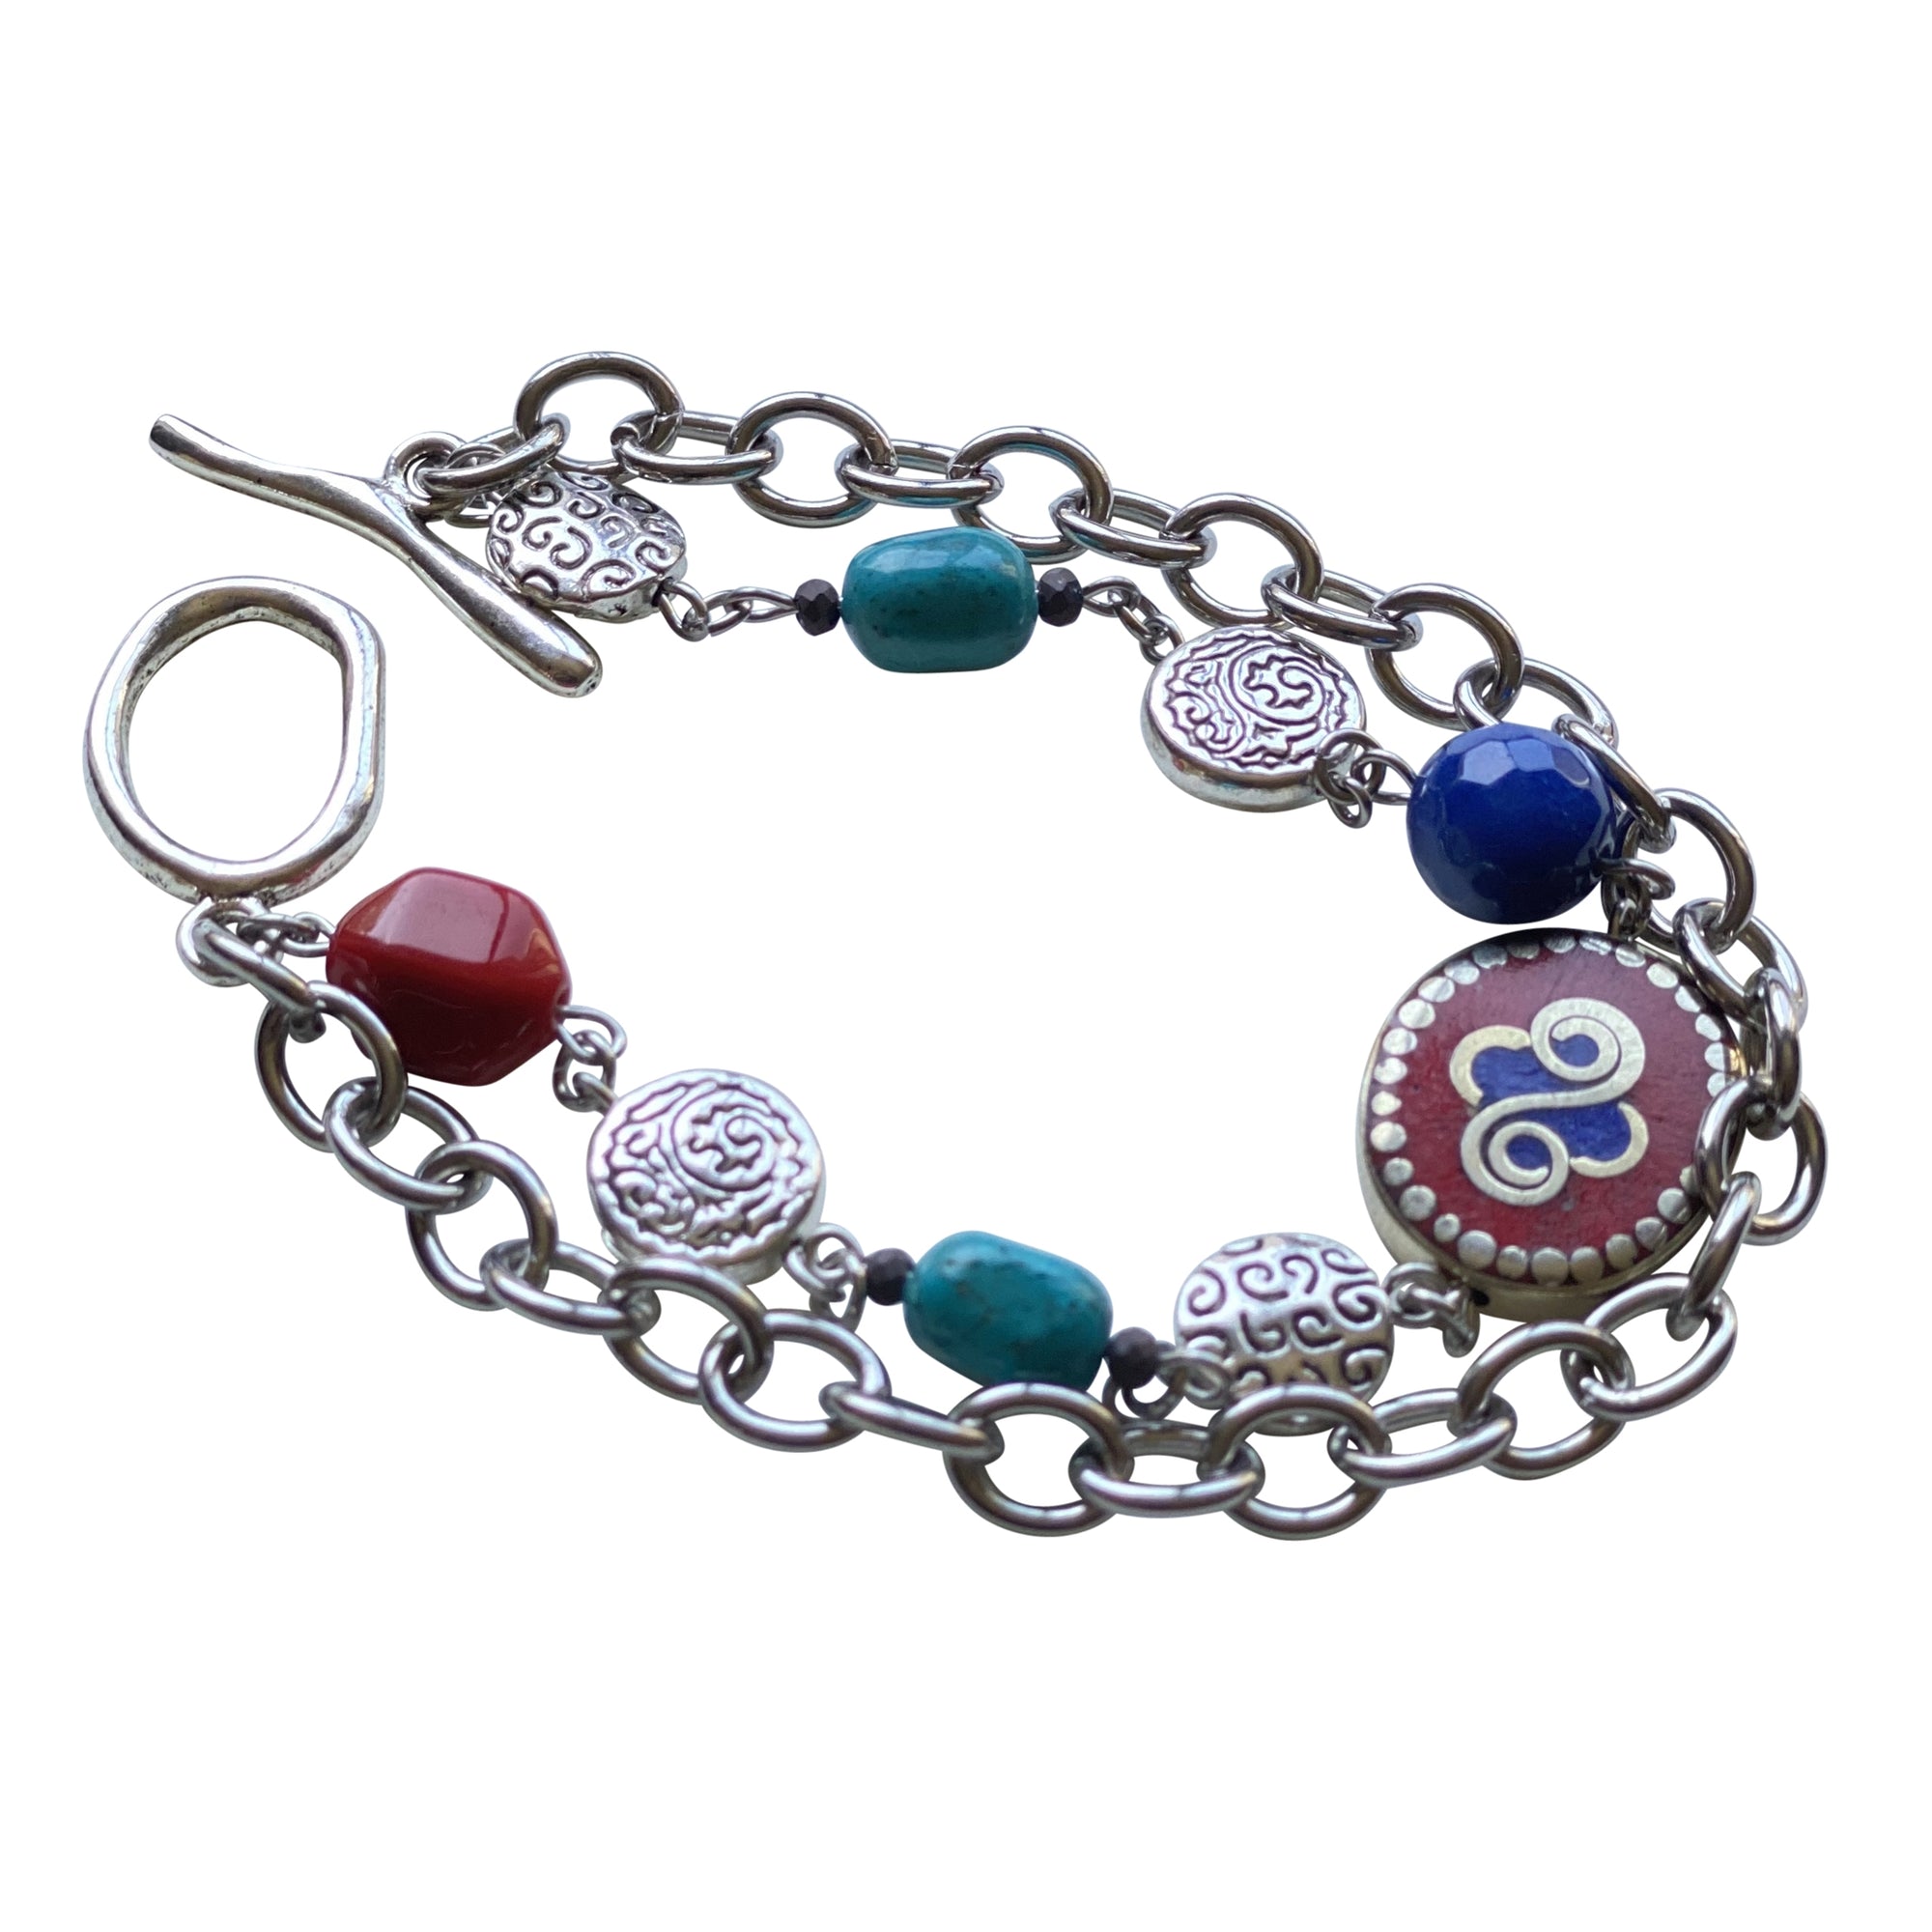 Tibetan Silver Stainless Steel Chain Bracelet with Toggle Clasp- Creative Jewelry by Marcia